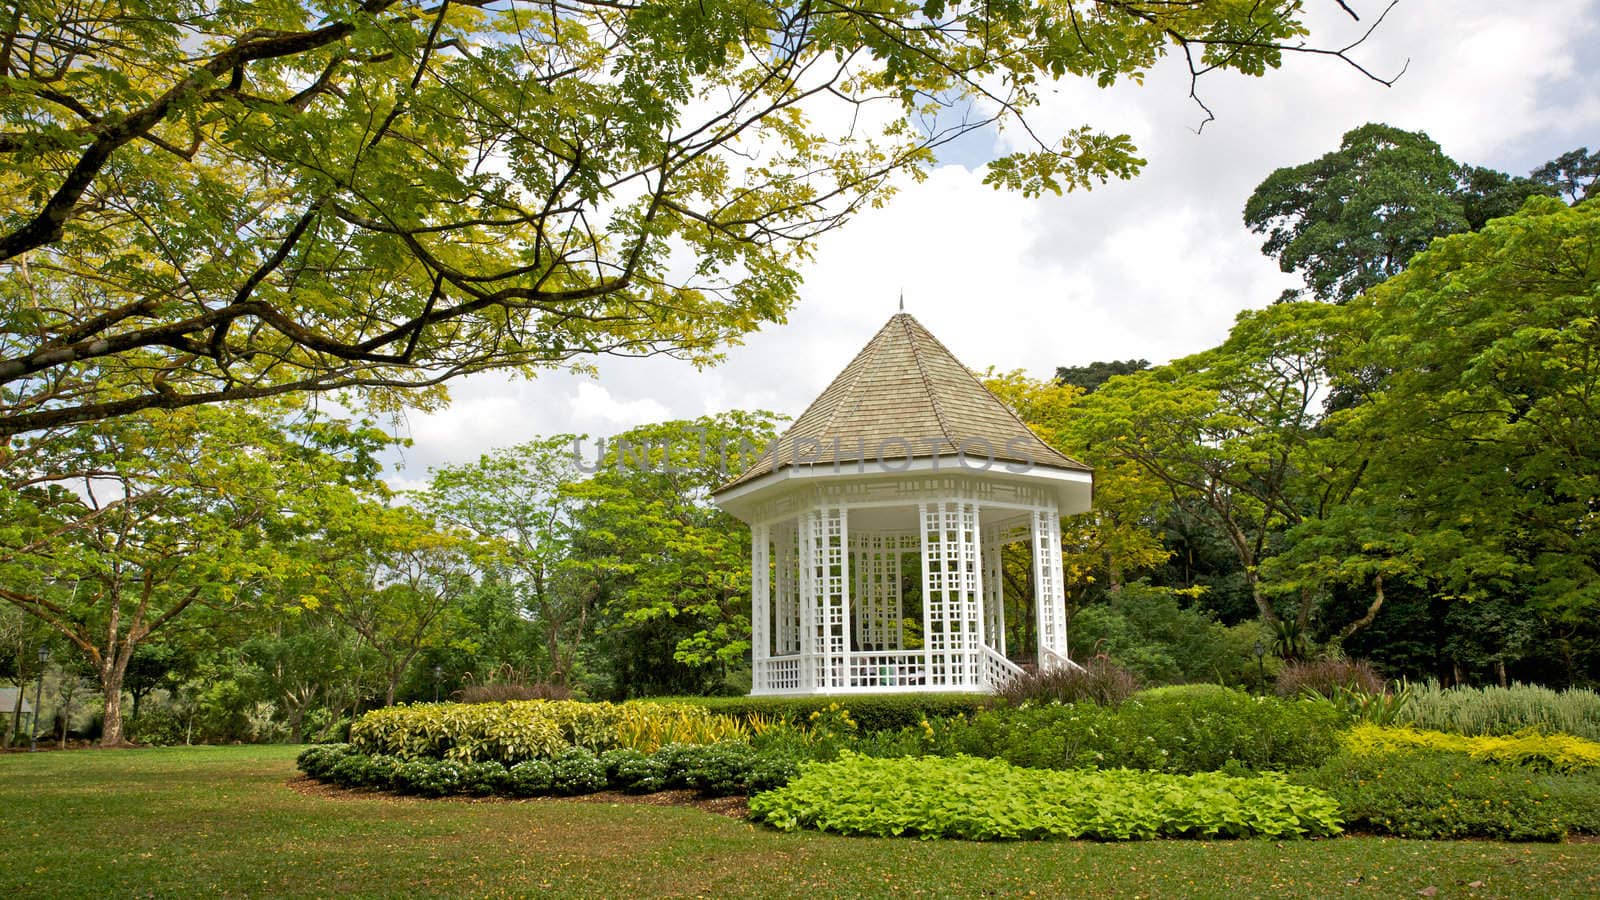 A gazebo known as The Bandstand in Singapore Botanic Gardens. Music performances took place here in the 1930s.